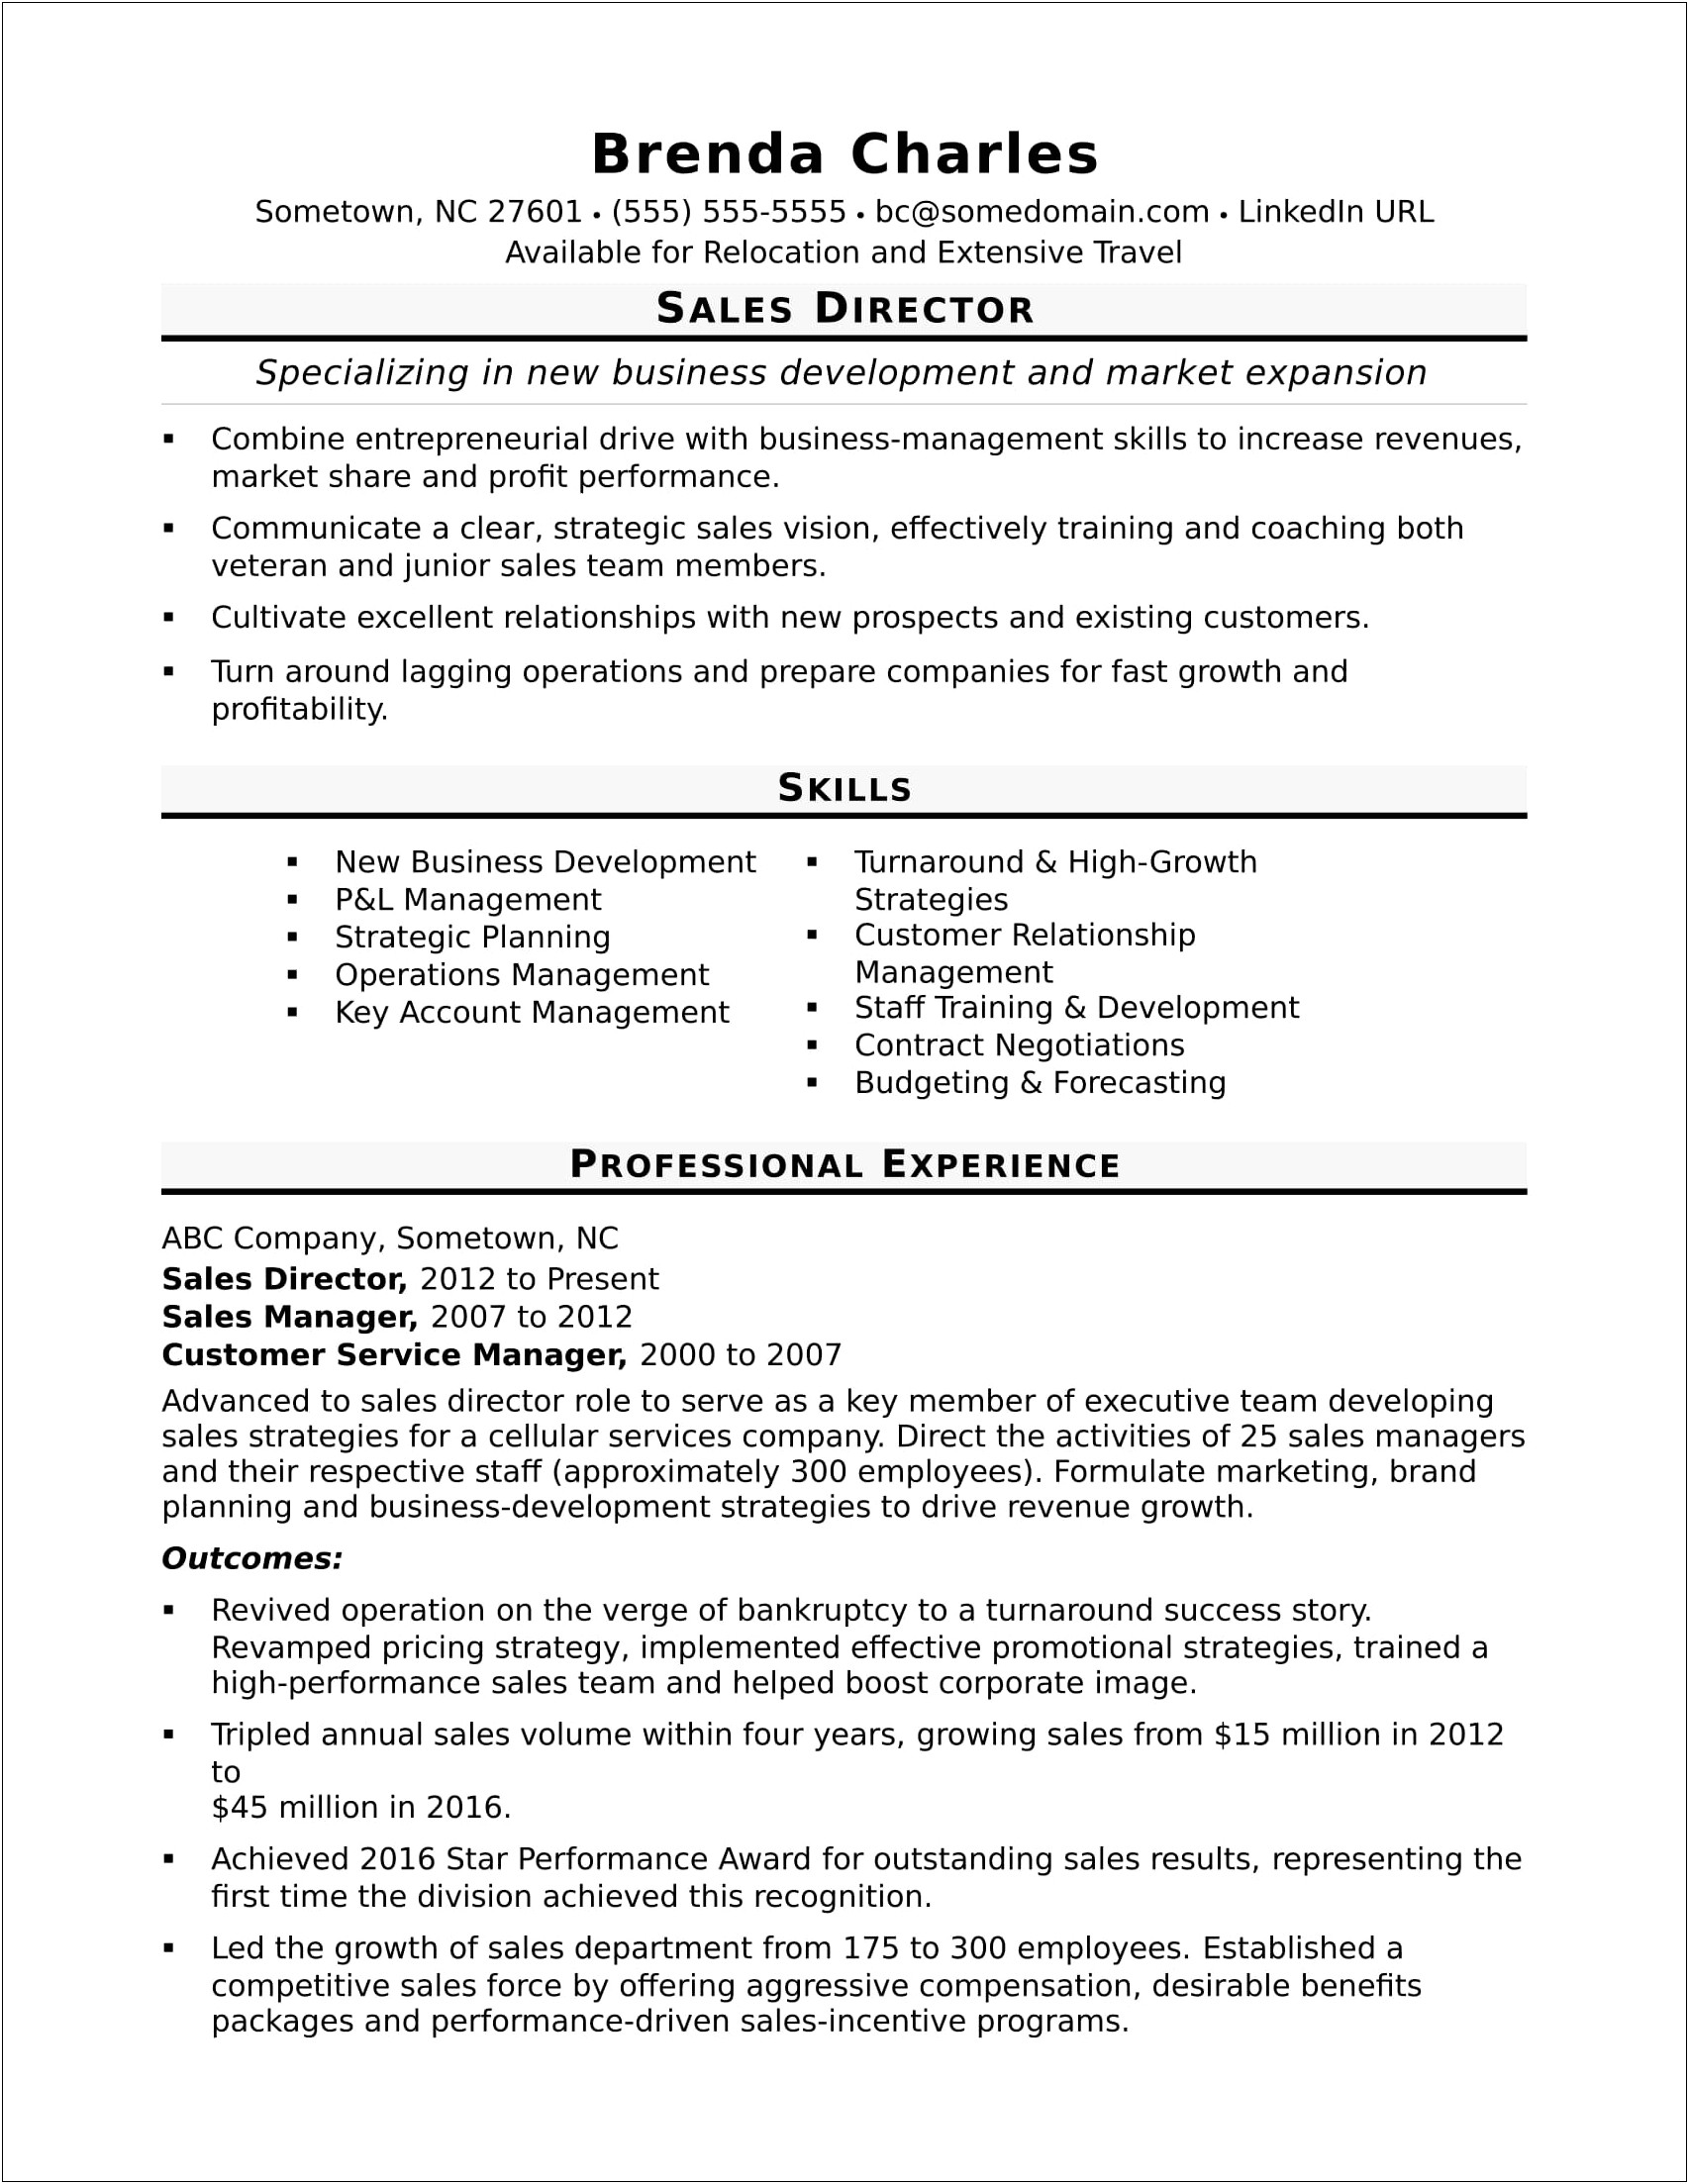 Sample Of Relationship Management Skill On A Resume